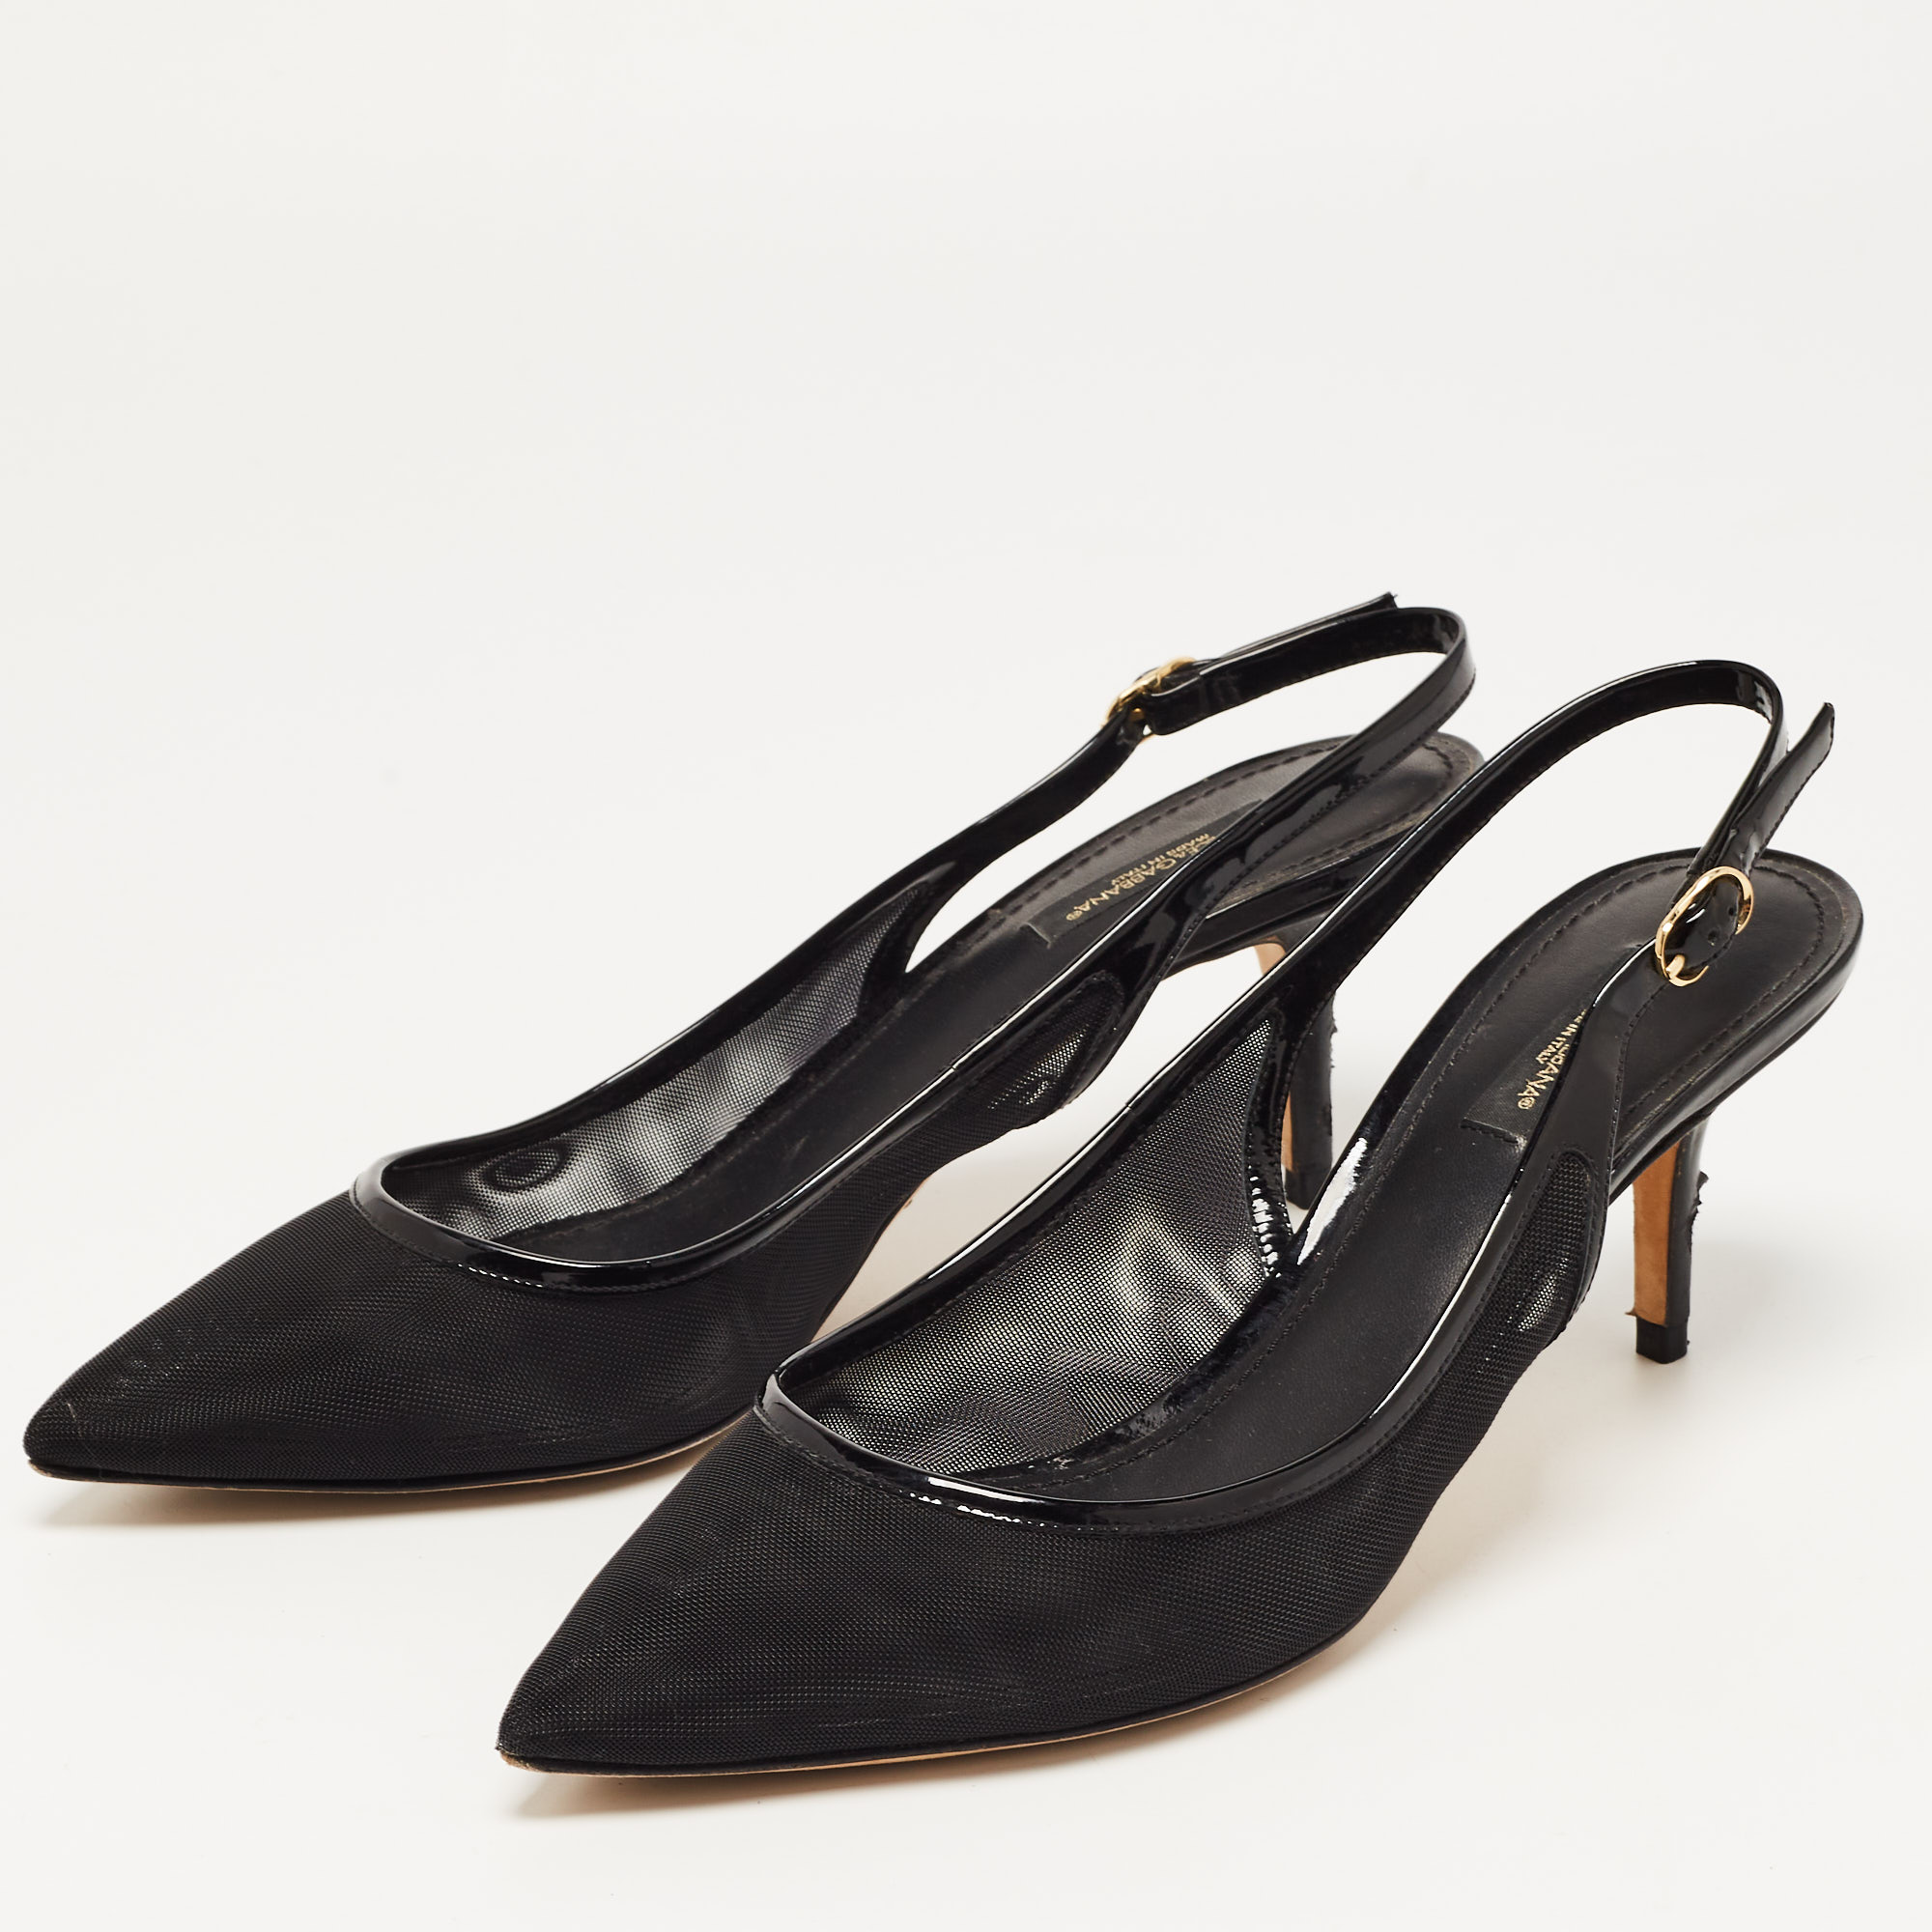 

Dolce & Gabbana Black Mesh And Patent Leather Slingback Pumps Size